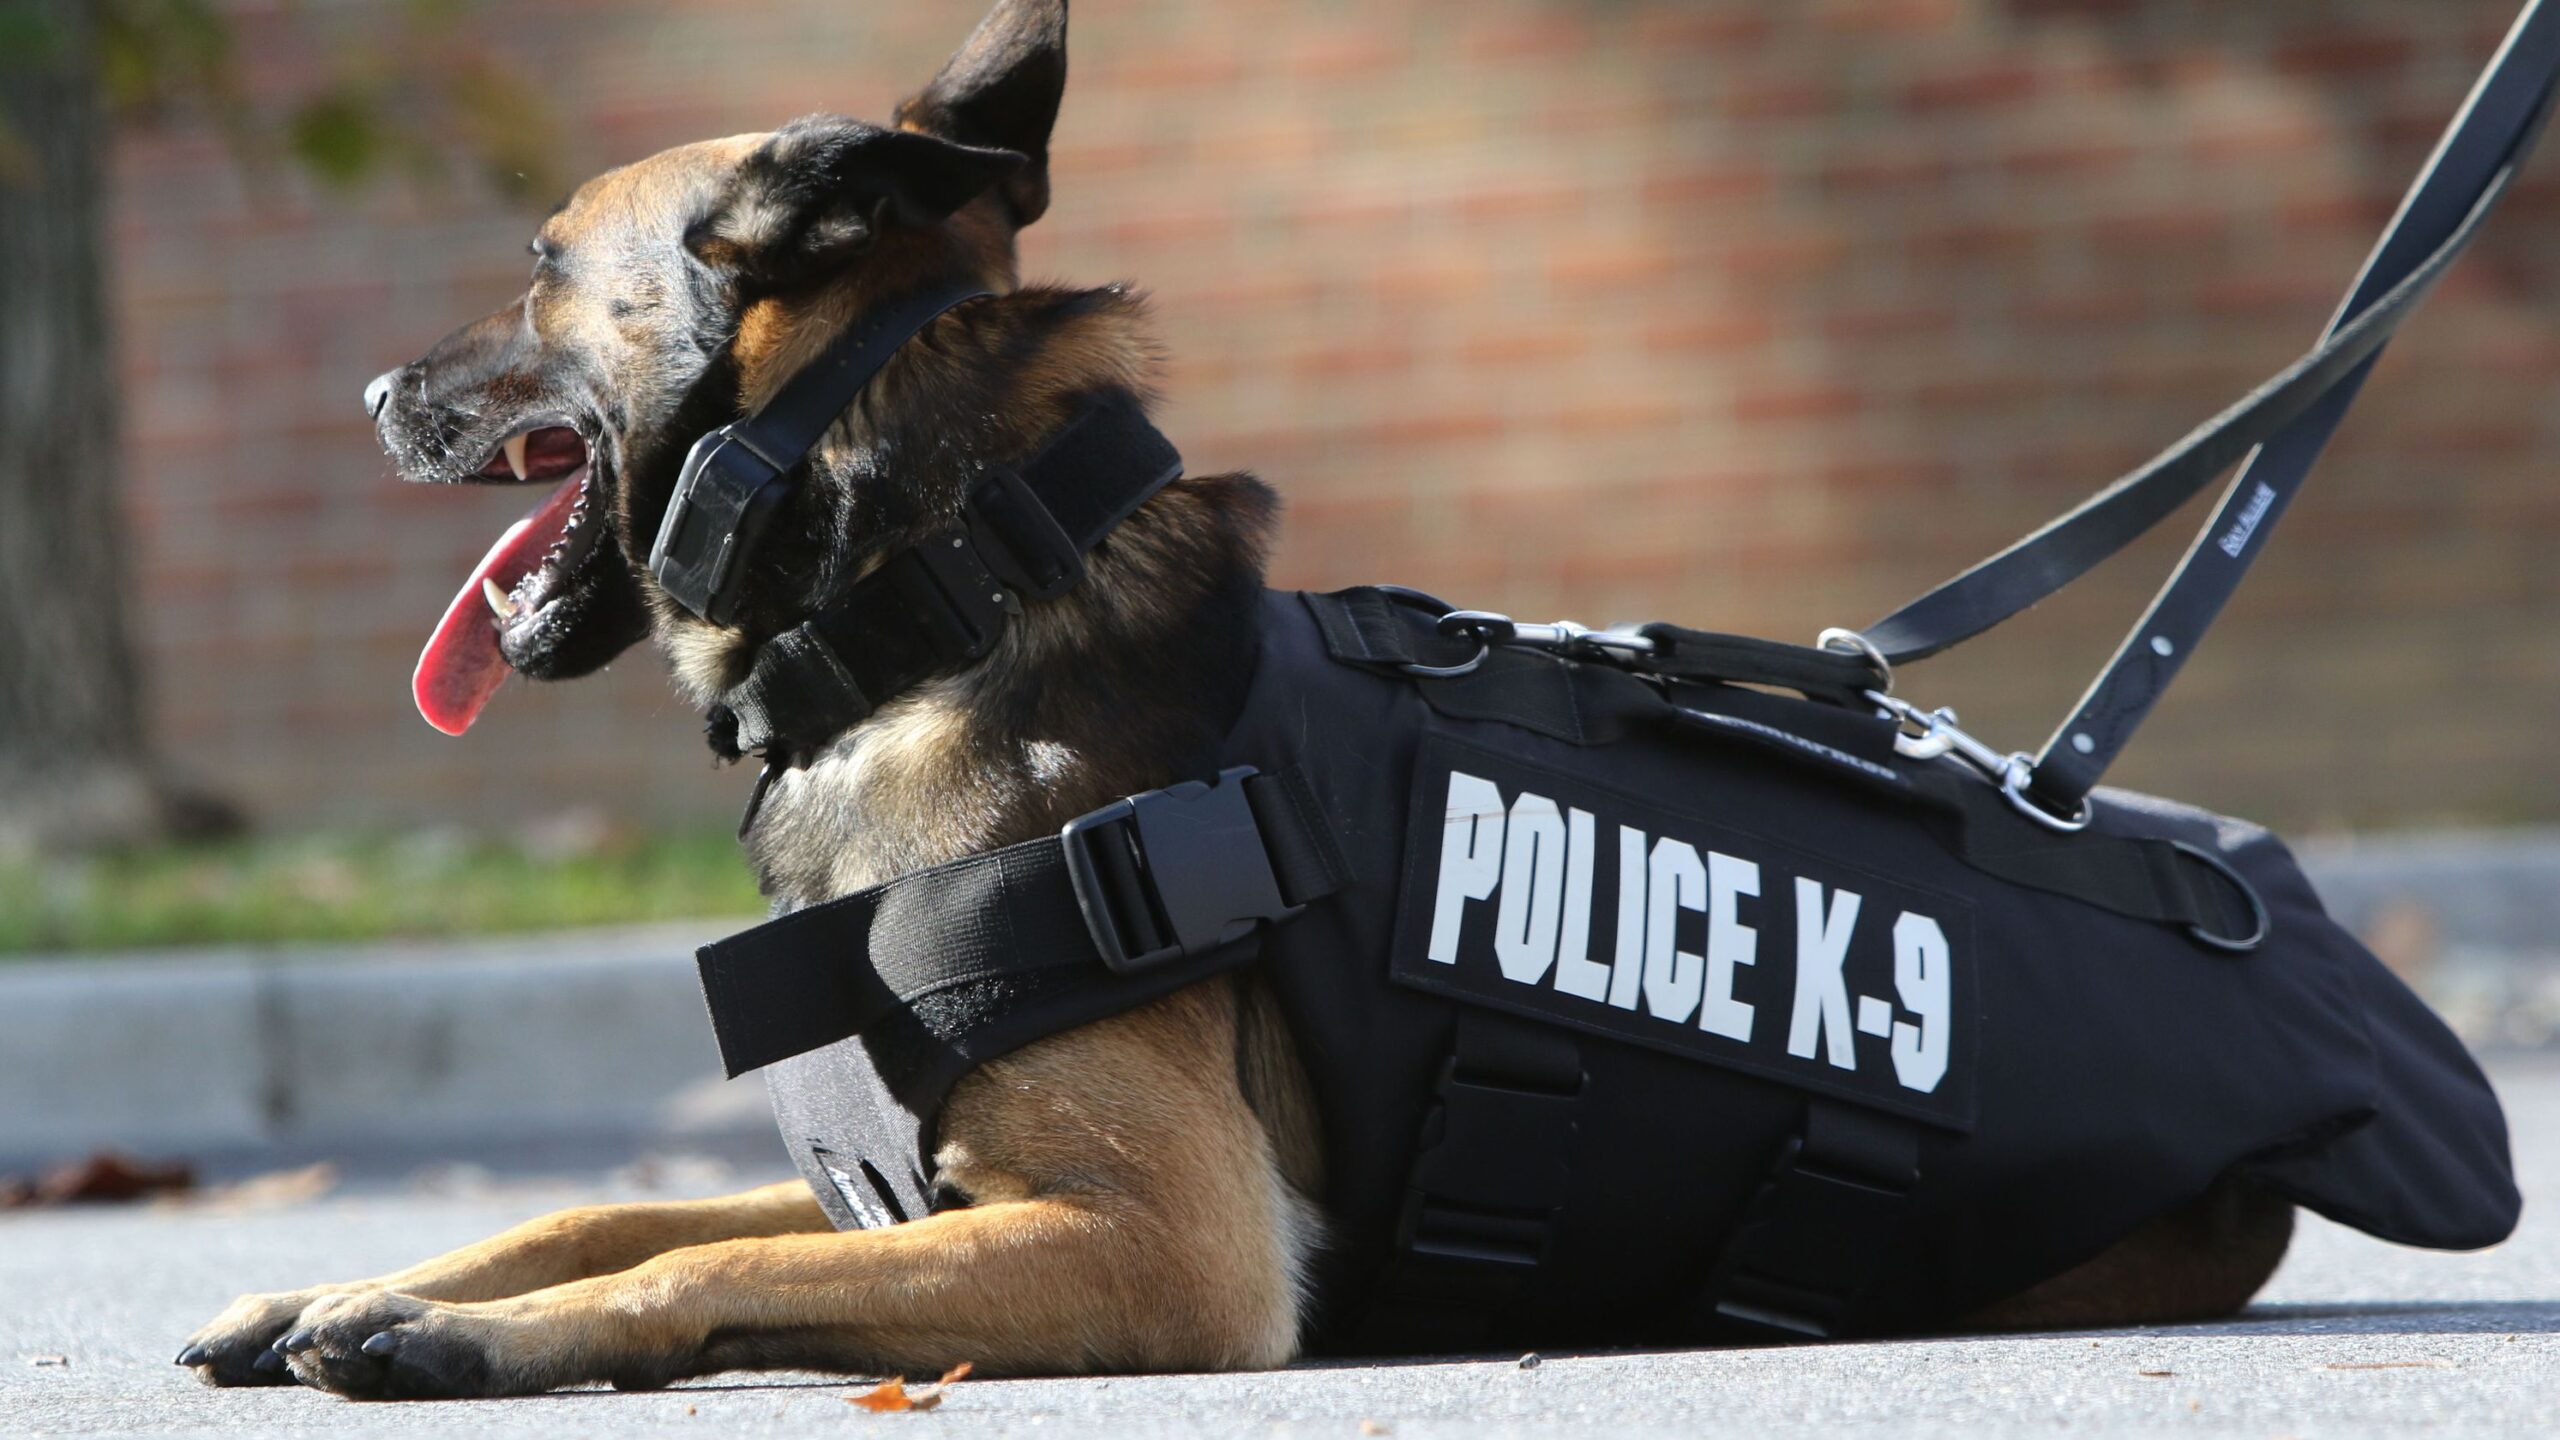 OPINION: UP, Hillsborough County need to invest in more therapy K-9s